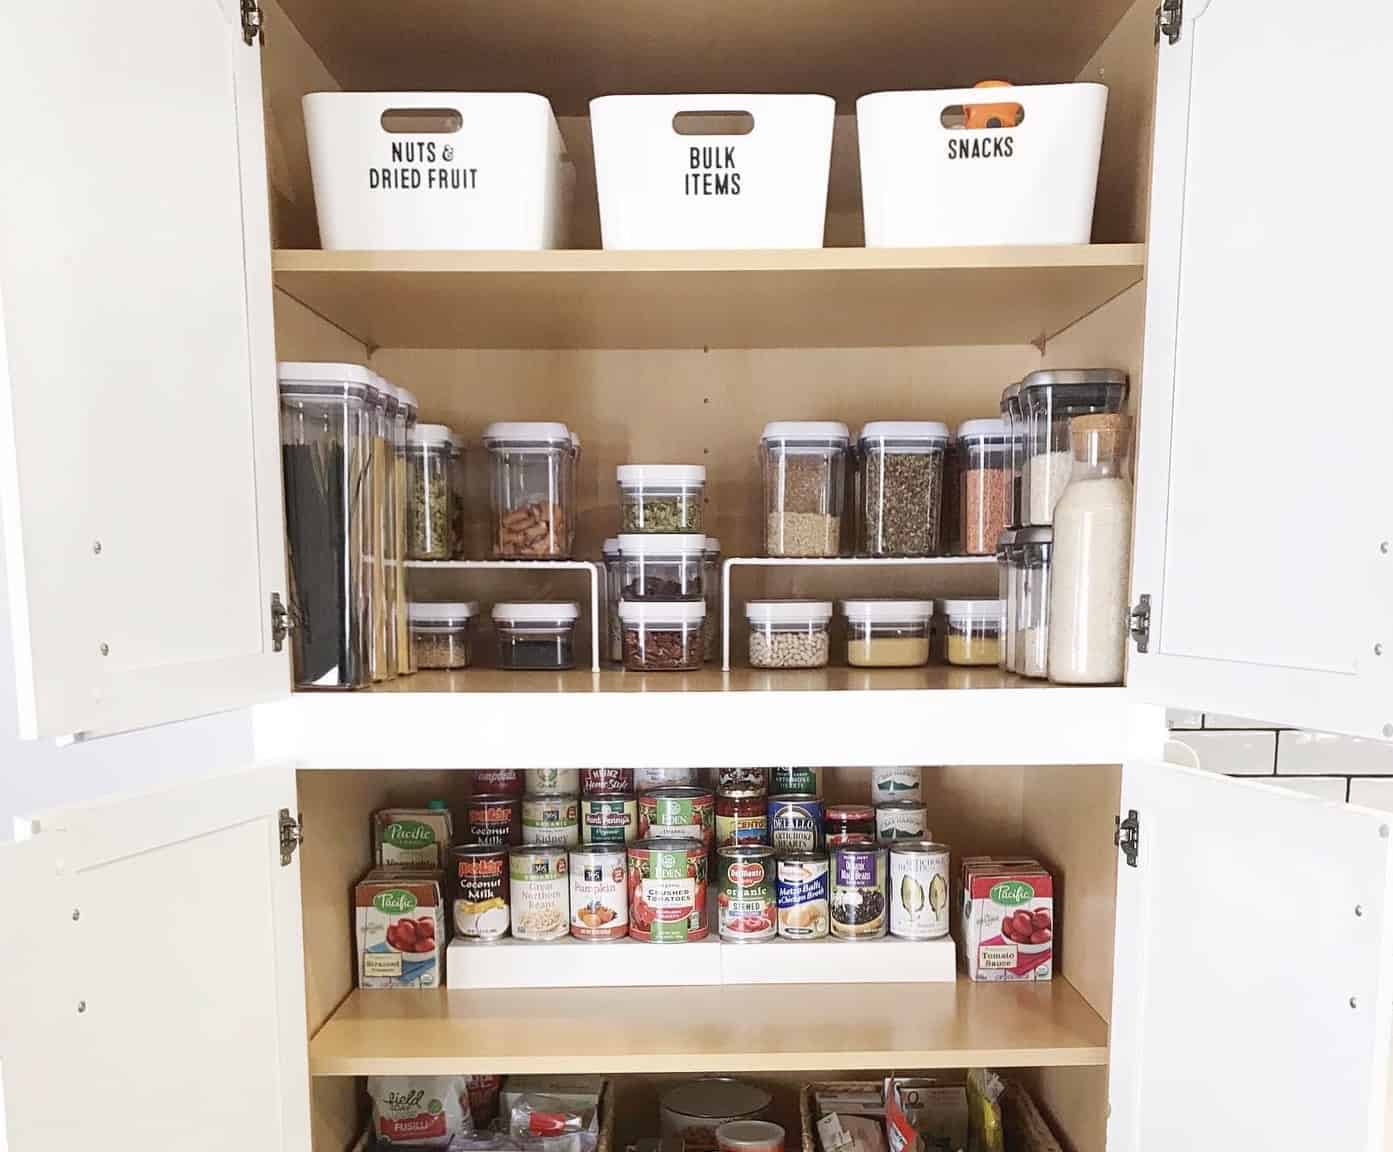 How to Eat Well with a Full Stocked Pantry - The Little Ferraro Kitchen